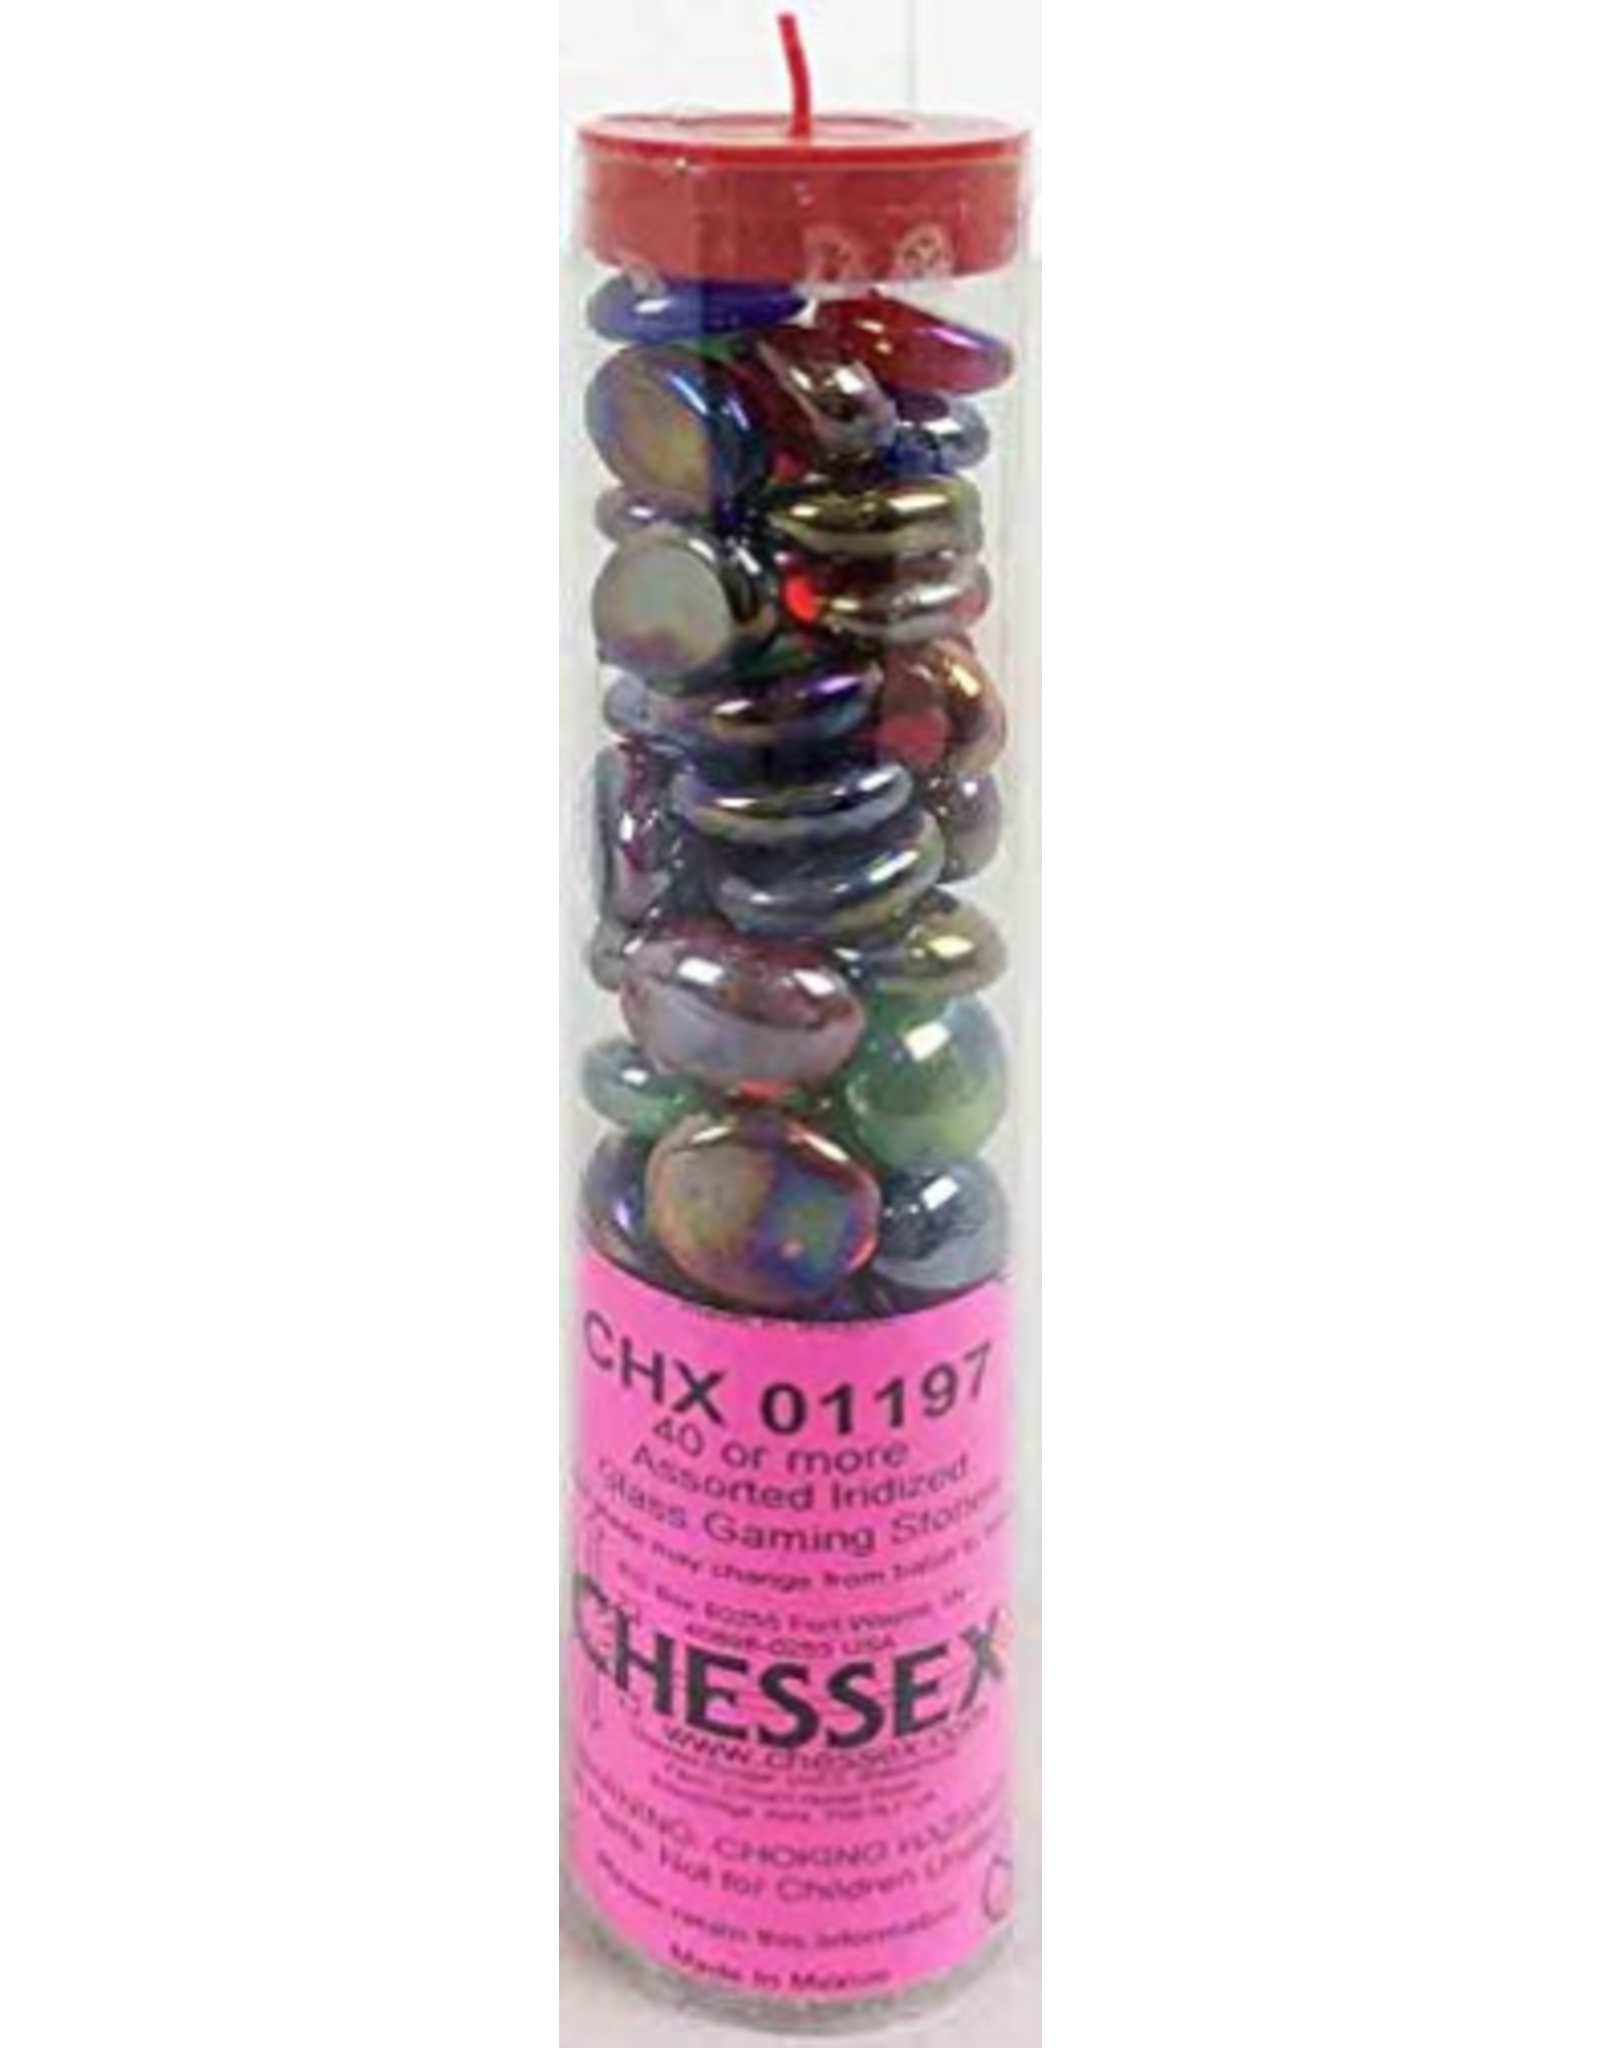 Chessex Iridized Mixed Colors Glass Stones in 5.5` Tube (40)